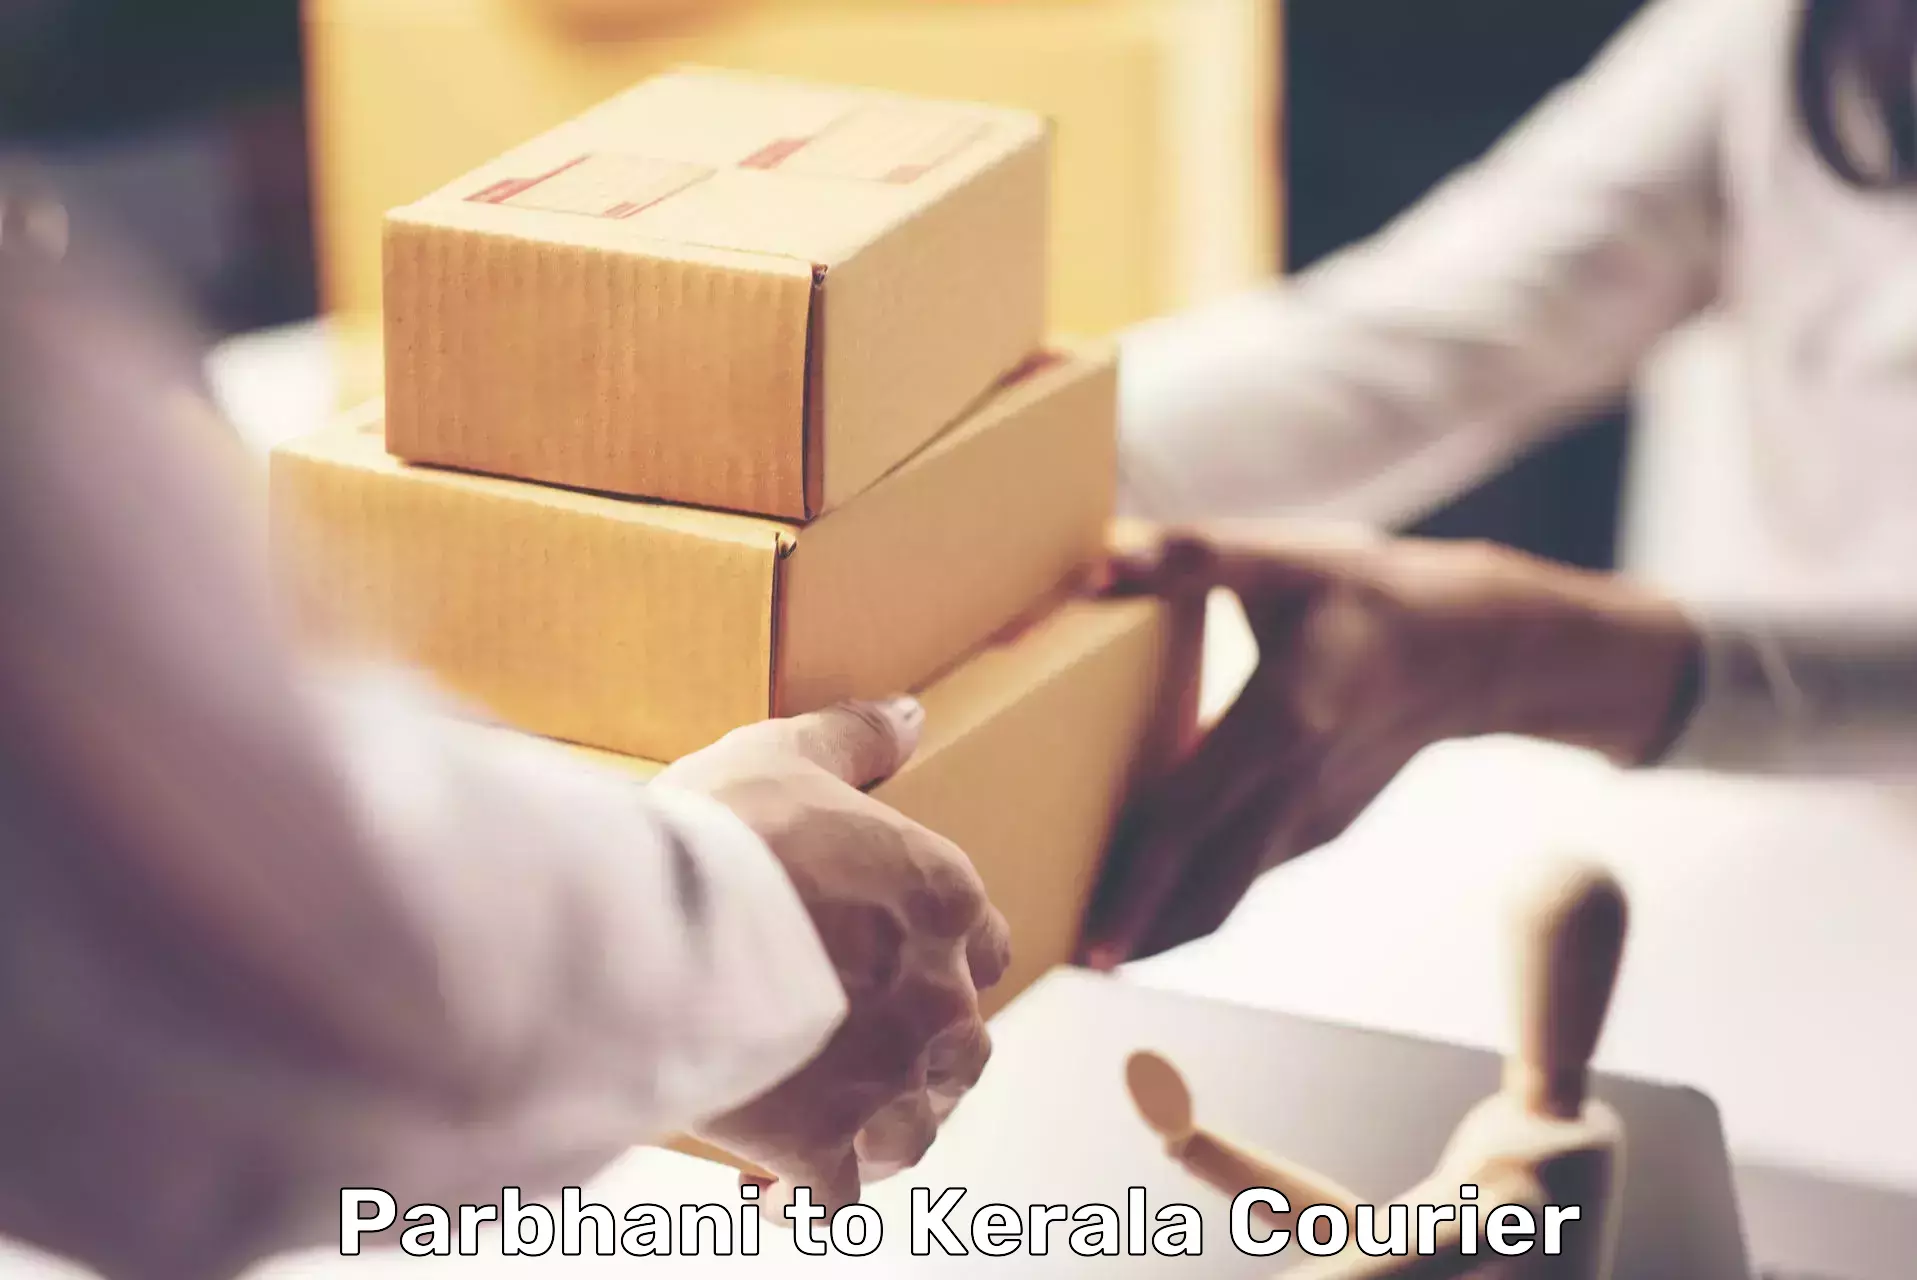 Tech-enabled shipping Parbhani to Kerala